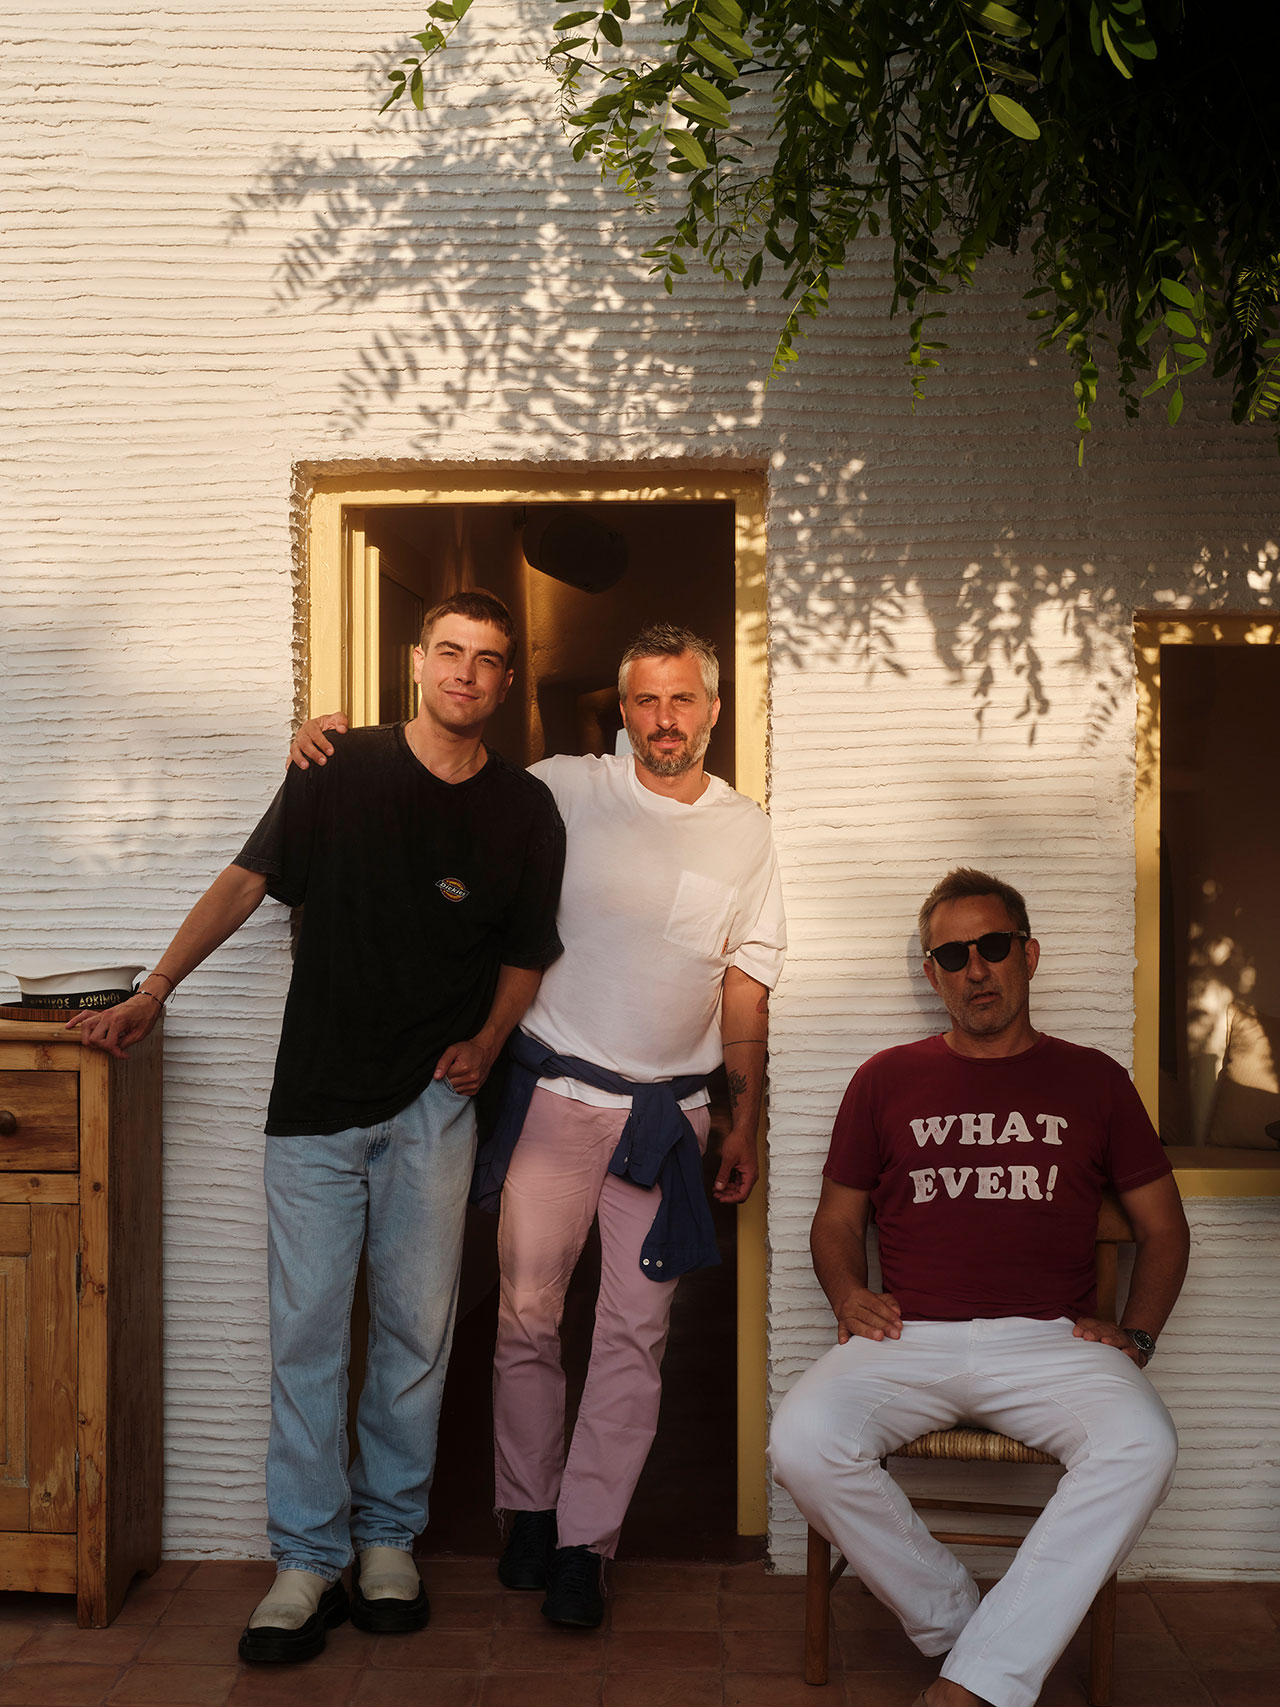 Architect Andreas Kostopoulos (left) and restaurateurs Thanasis Panourgias (middle) and Harry Spyrou.
Photography by Yiorgos Kaplanidis.